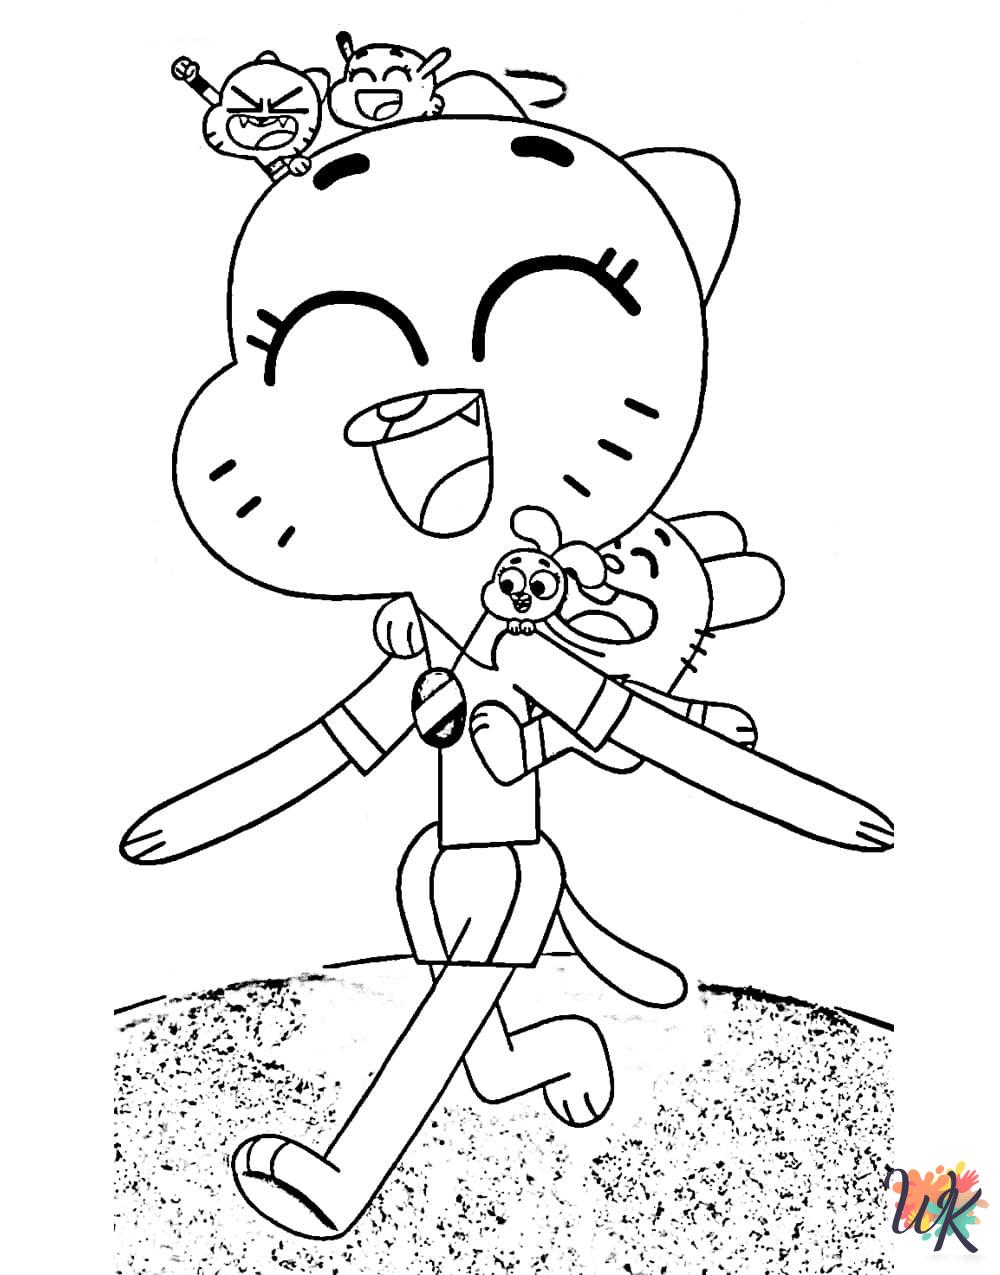 Gumball free coloring pages